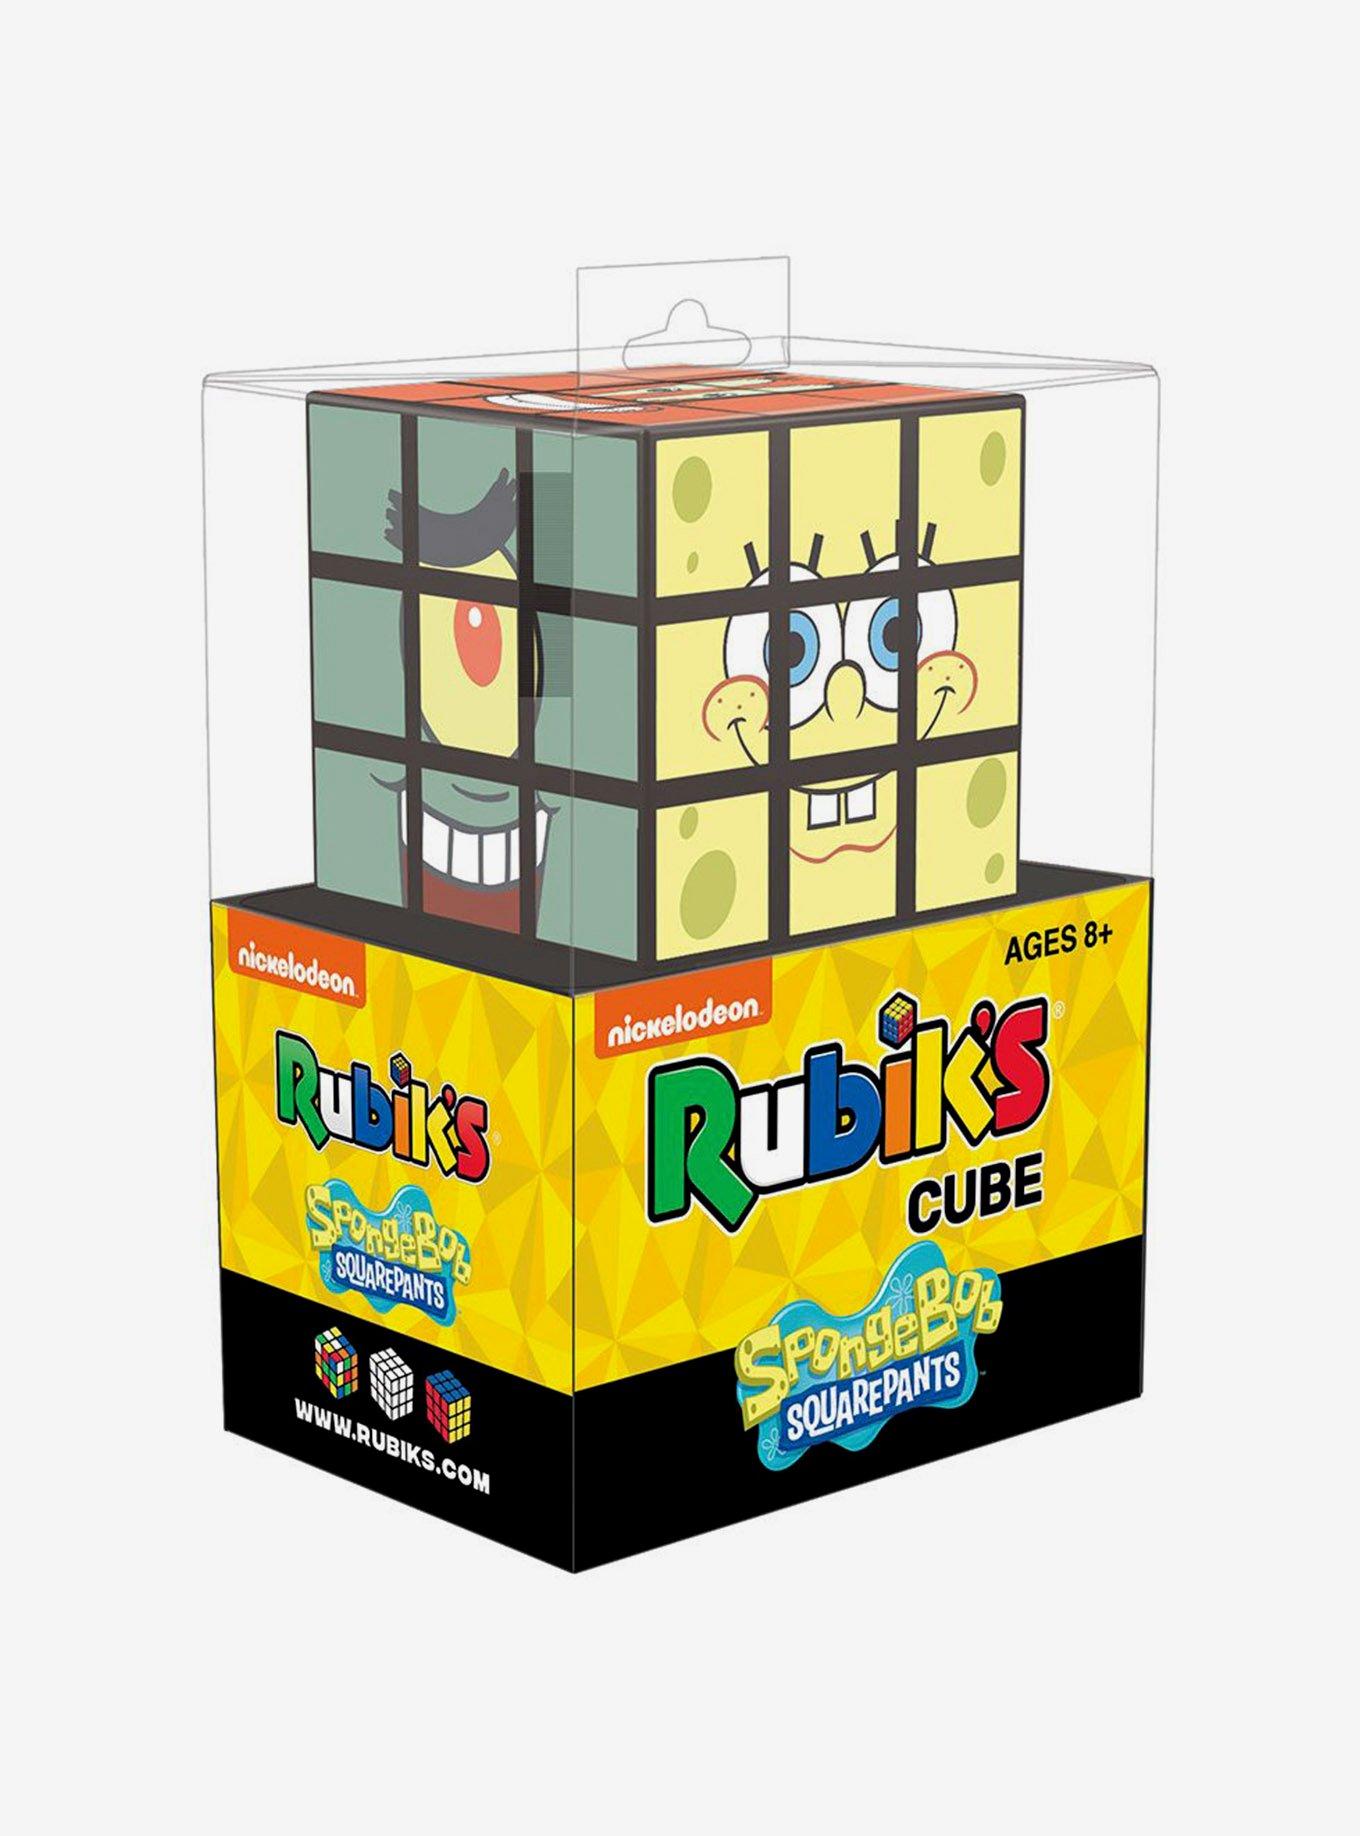 After Naruto, Rubik's Cube Studio will fight One Piece Project: Fighter